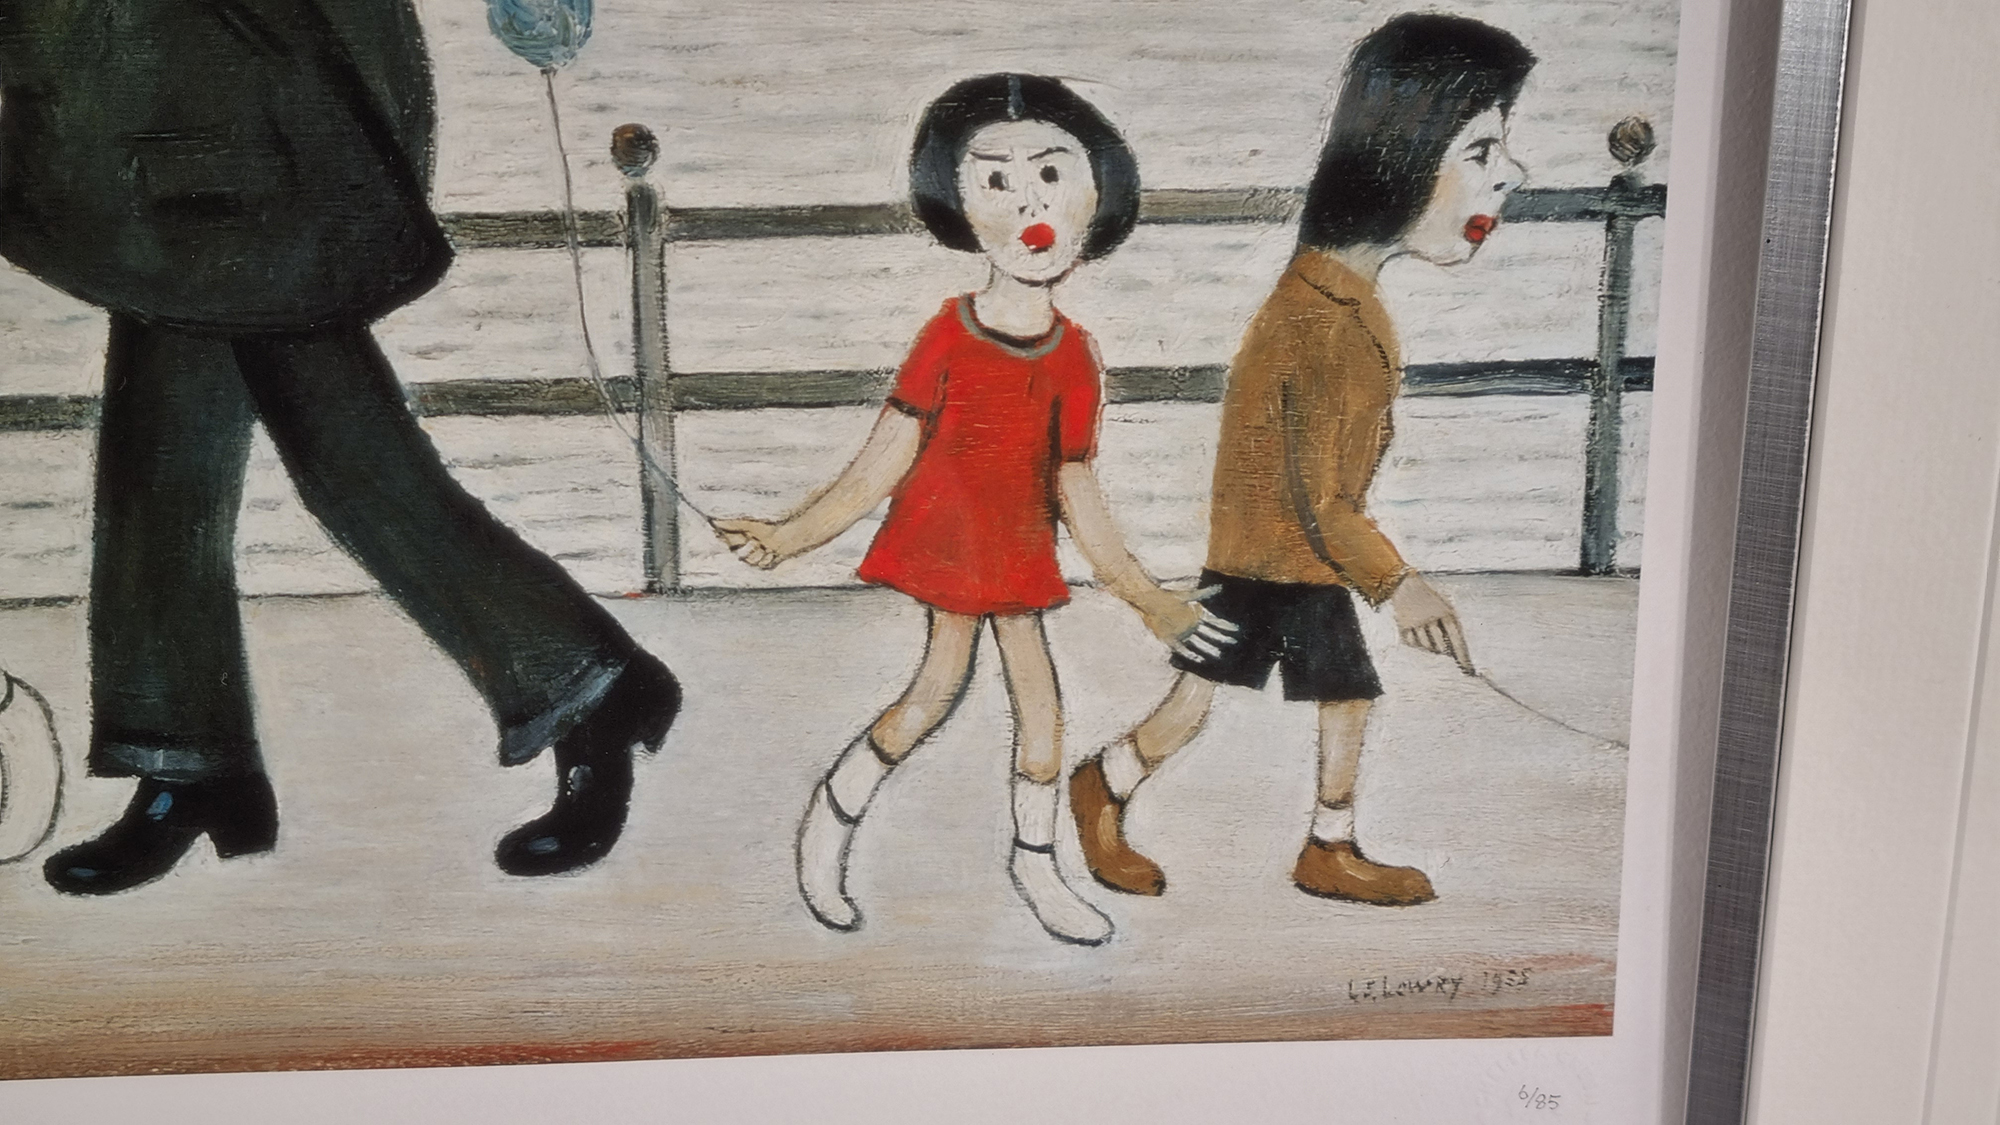 Limited Edition L.S. Lowry ""On The Promenade"" - Image 6 of 7